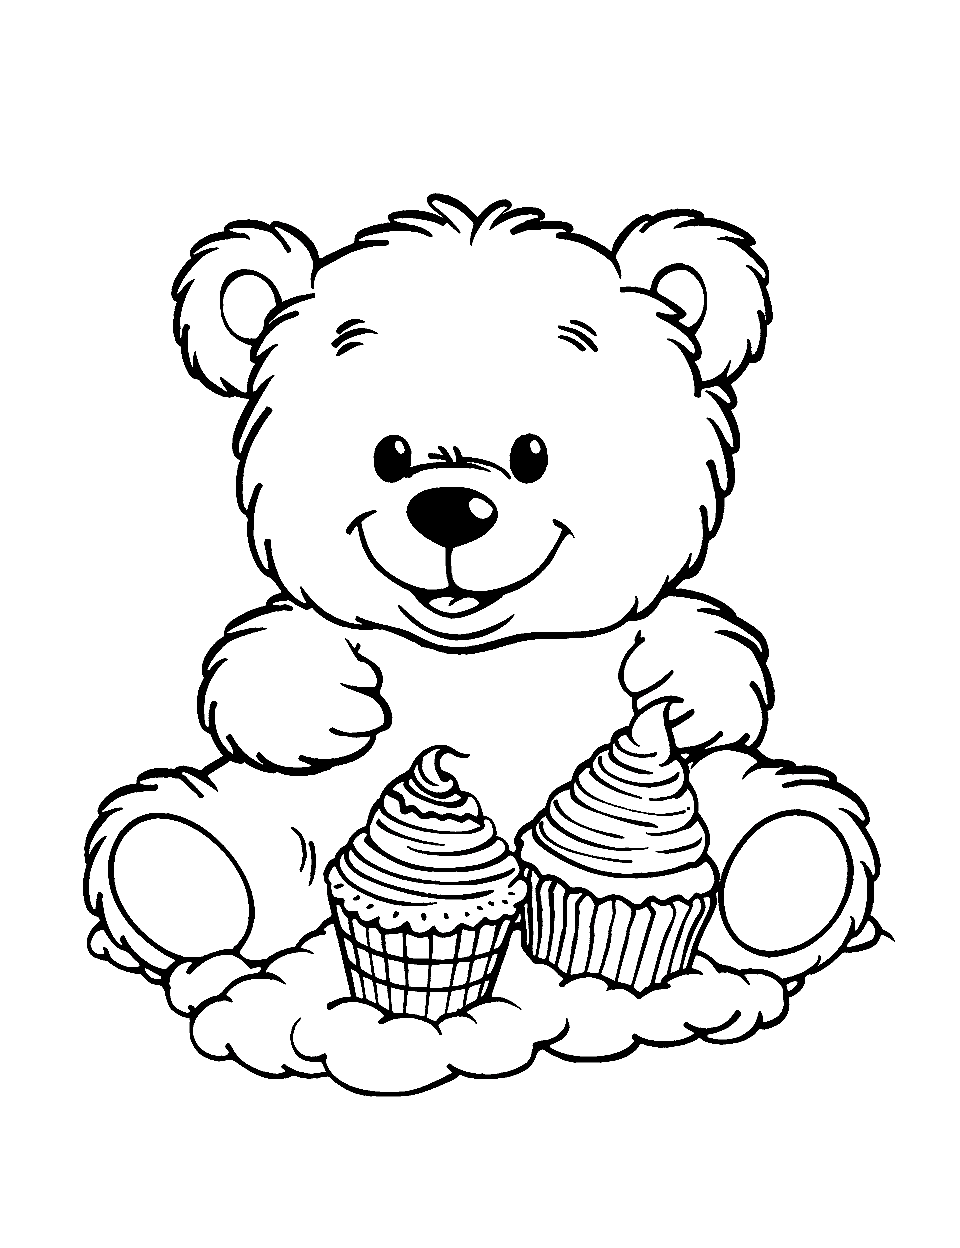 Cute Teddy Bear with Cupcakes Coloring Page - A teddy bear with cute little cupcakes.